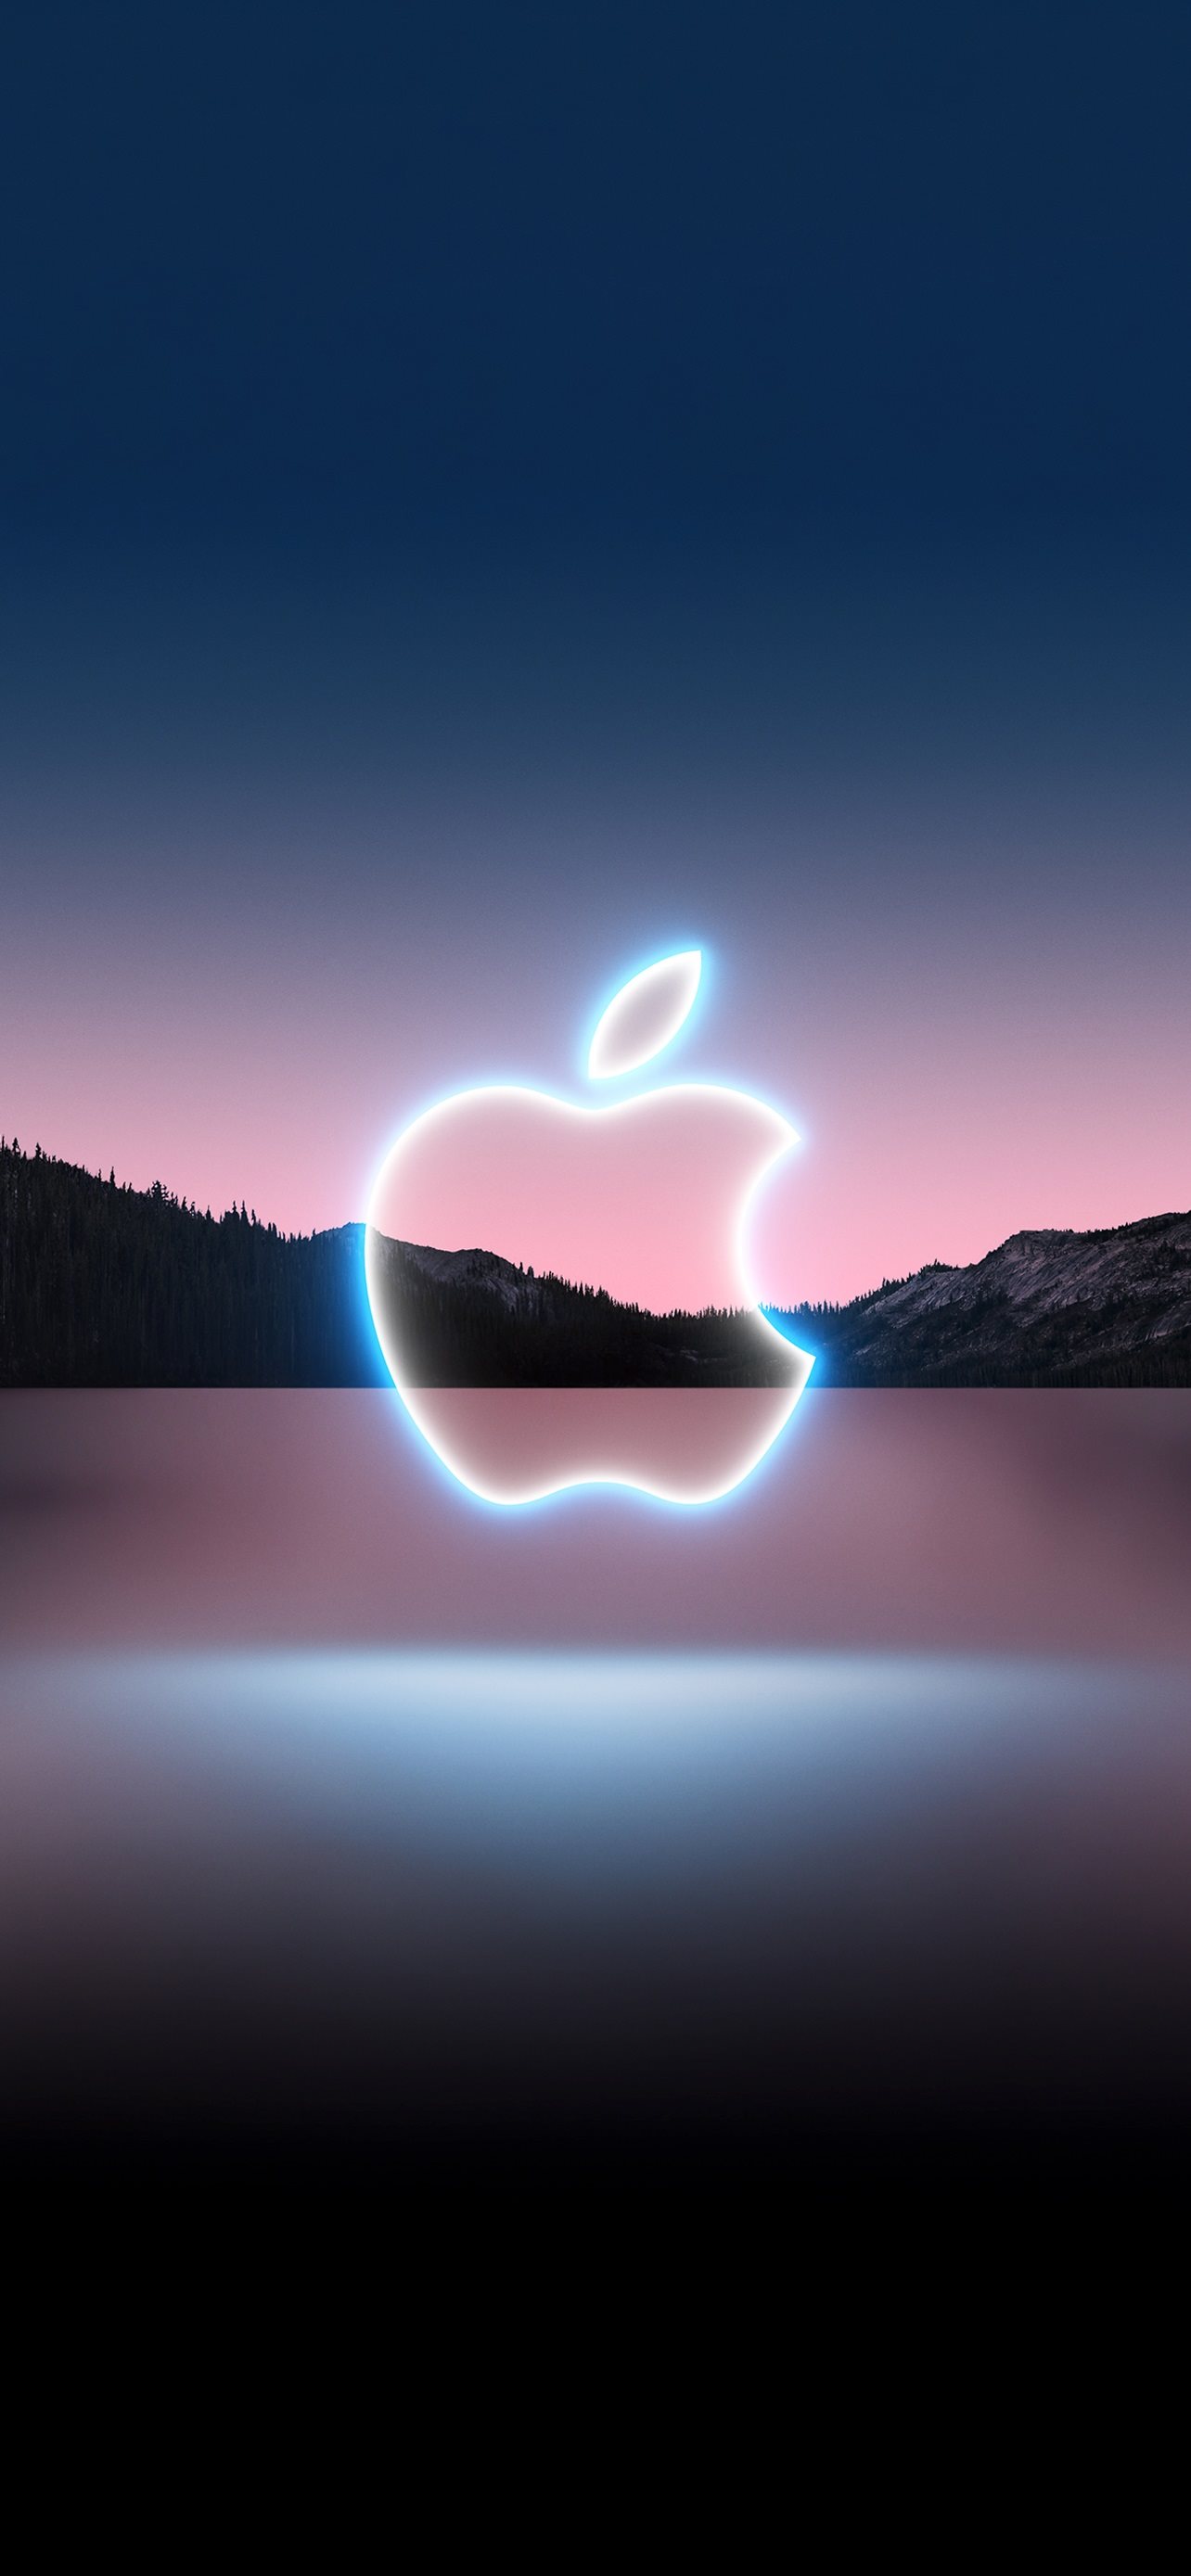 California Streaming Apple Event 1 iPhone wallpaper 